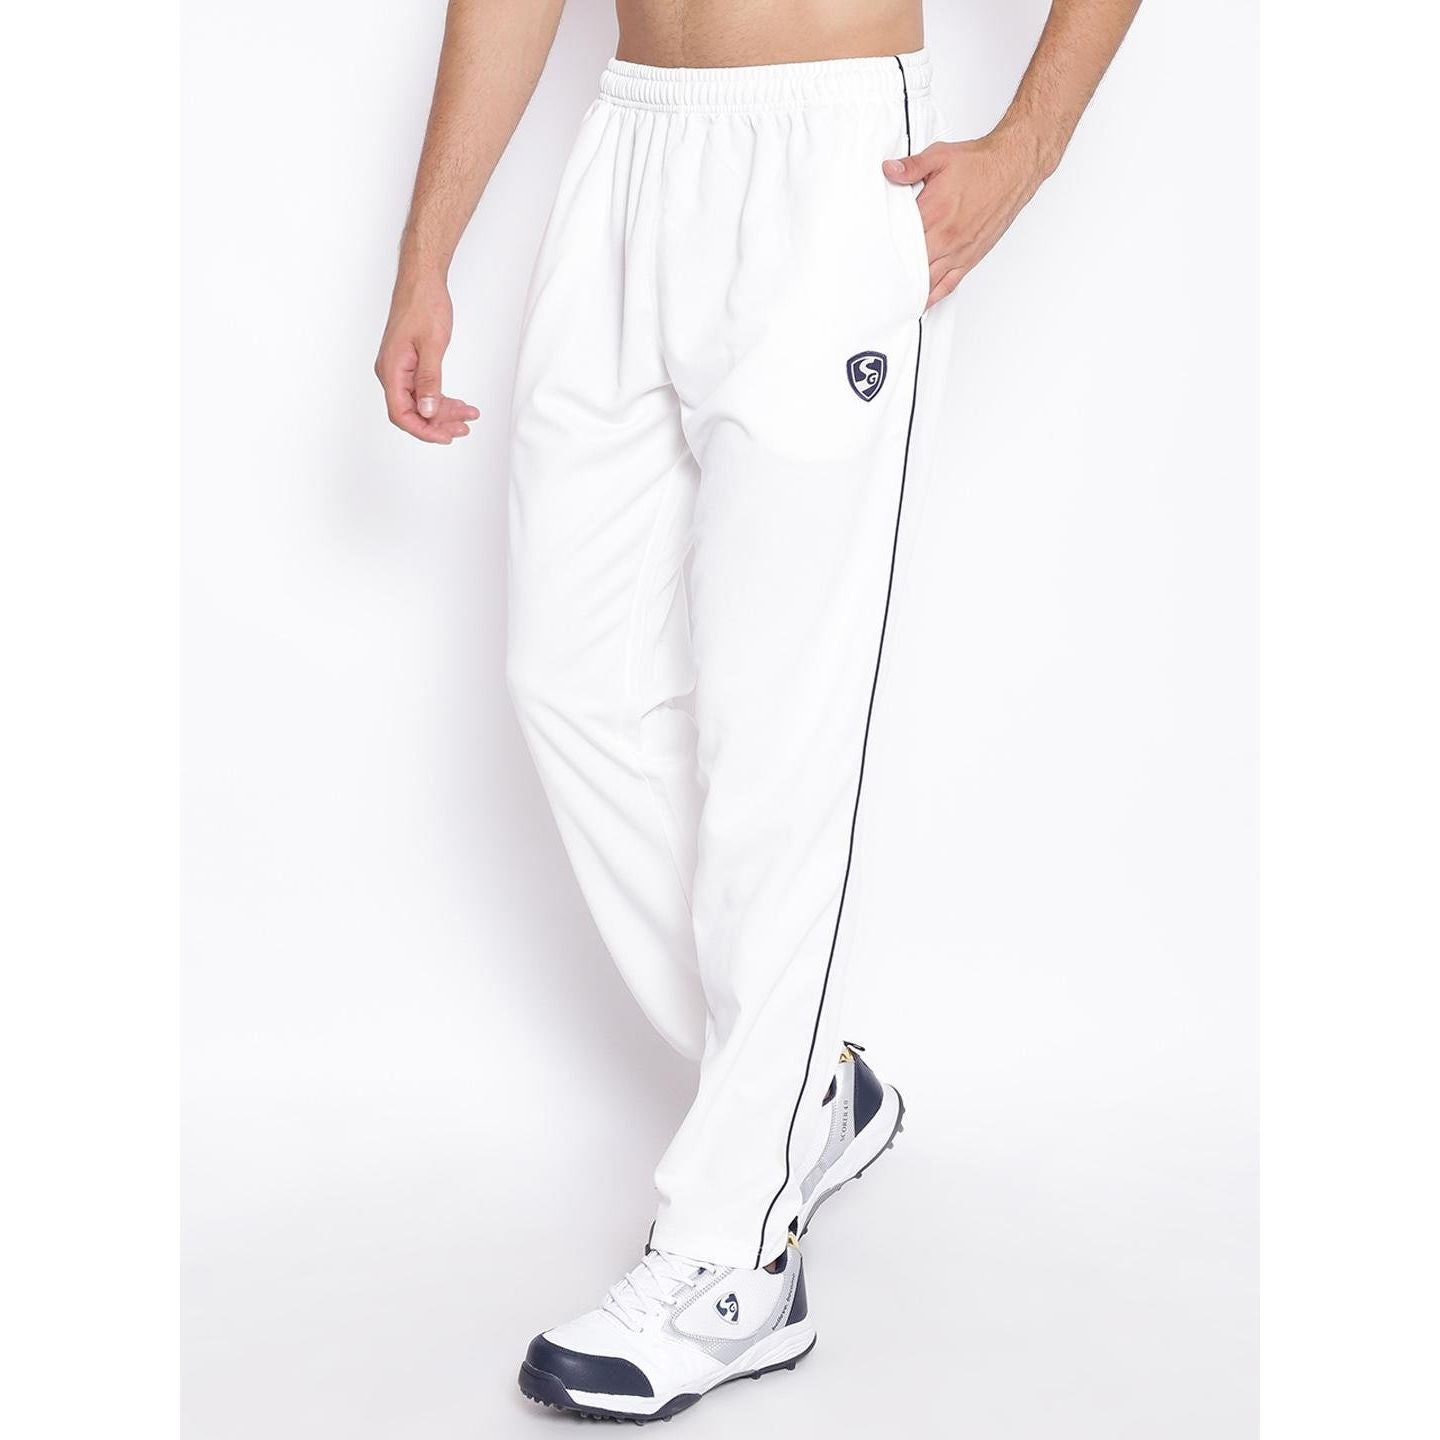 SG Cricket Pant Test(Small) White : Amazon.in: Clothing & Accessories